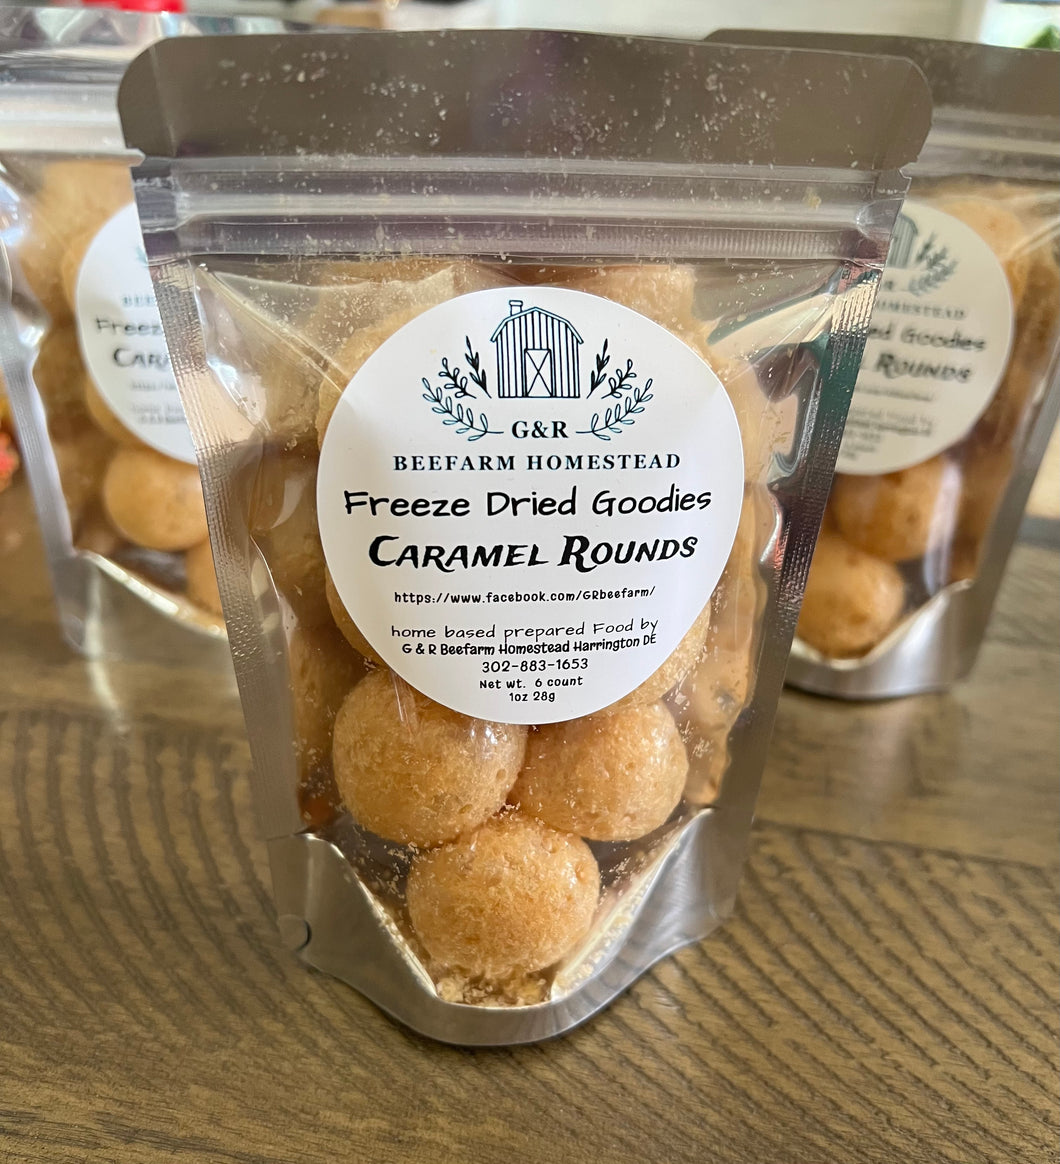 Homestead Freeze Dried Goodies - Caramel Rounds